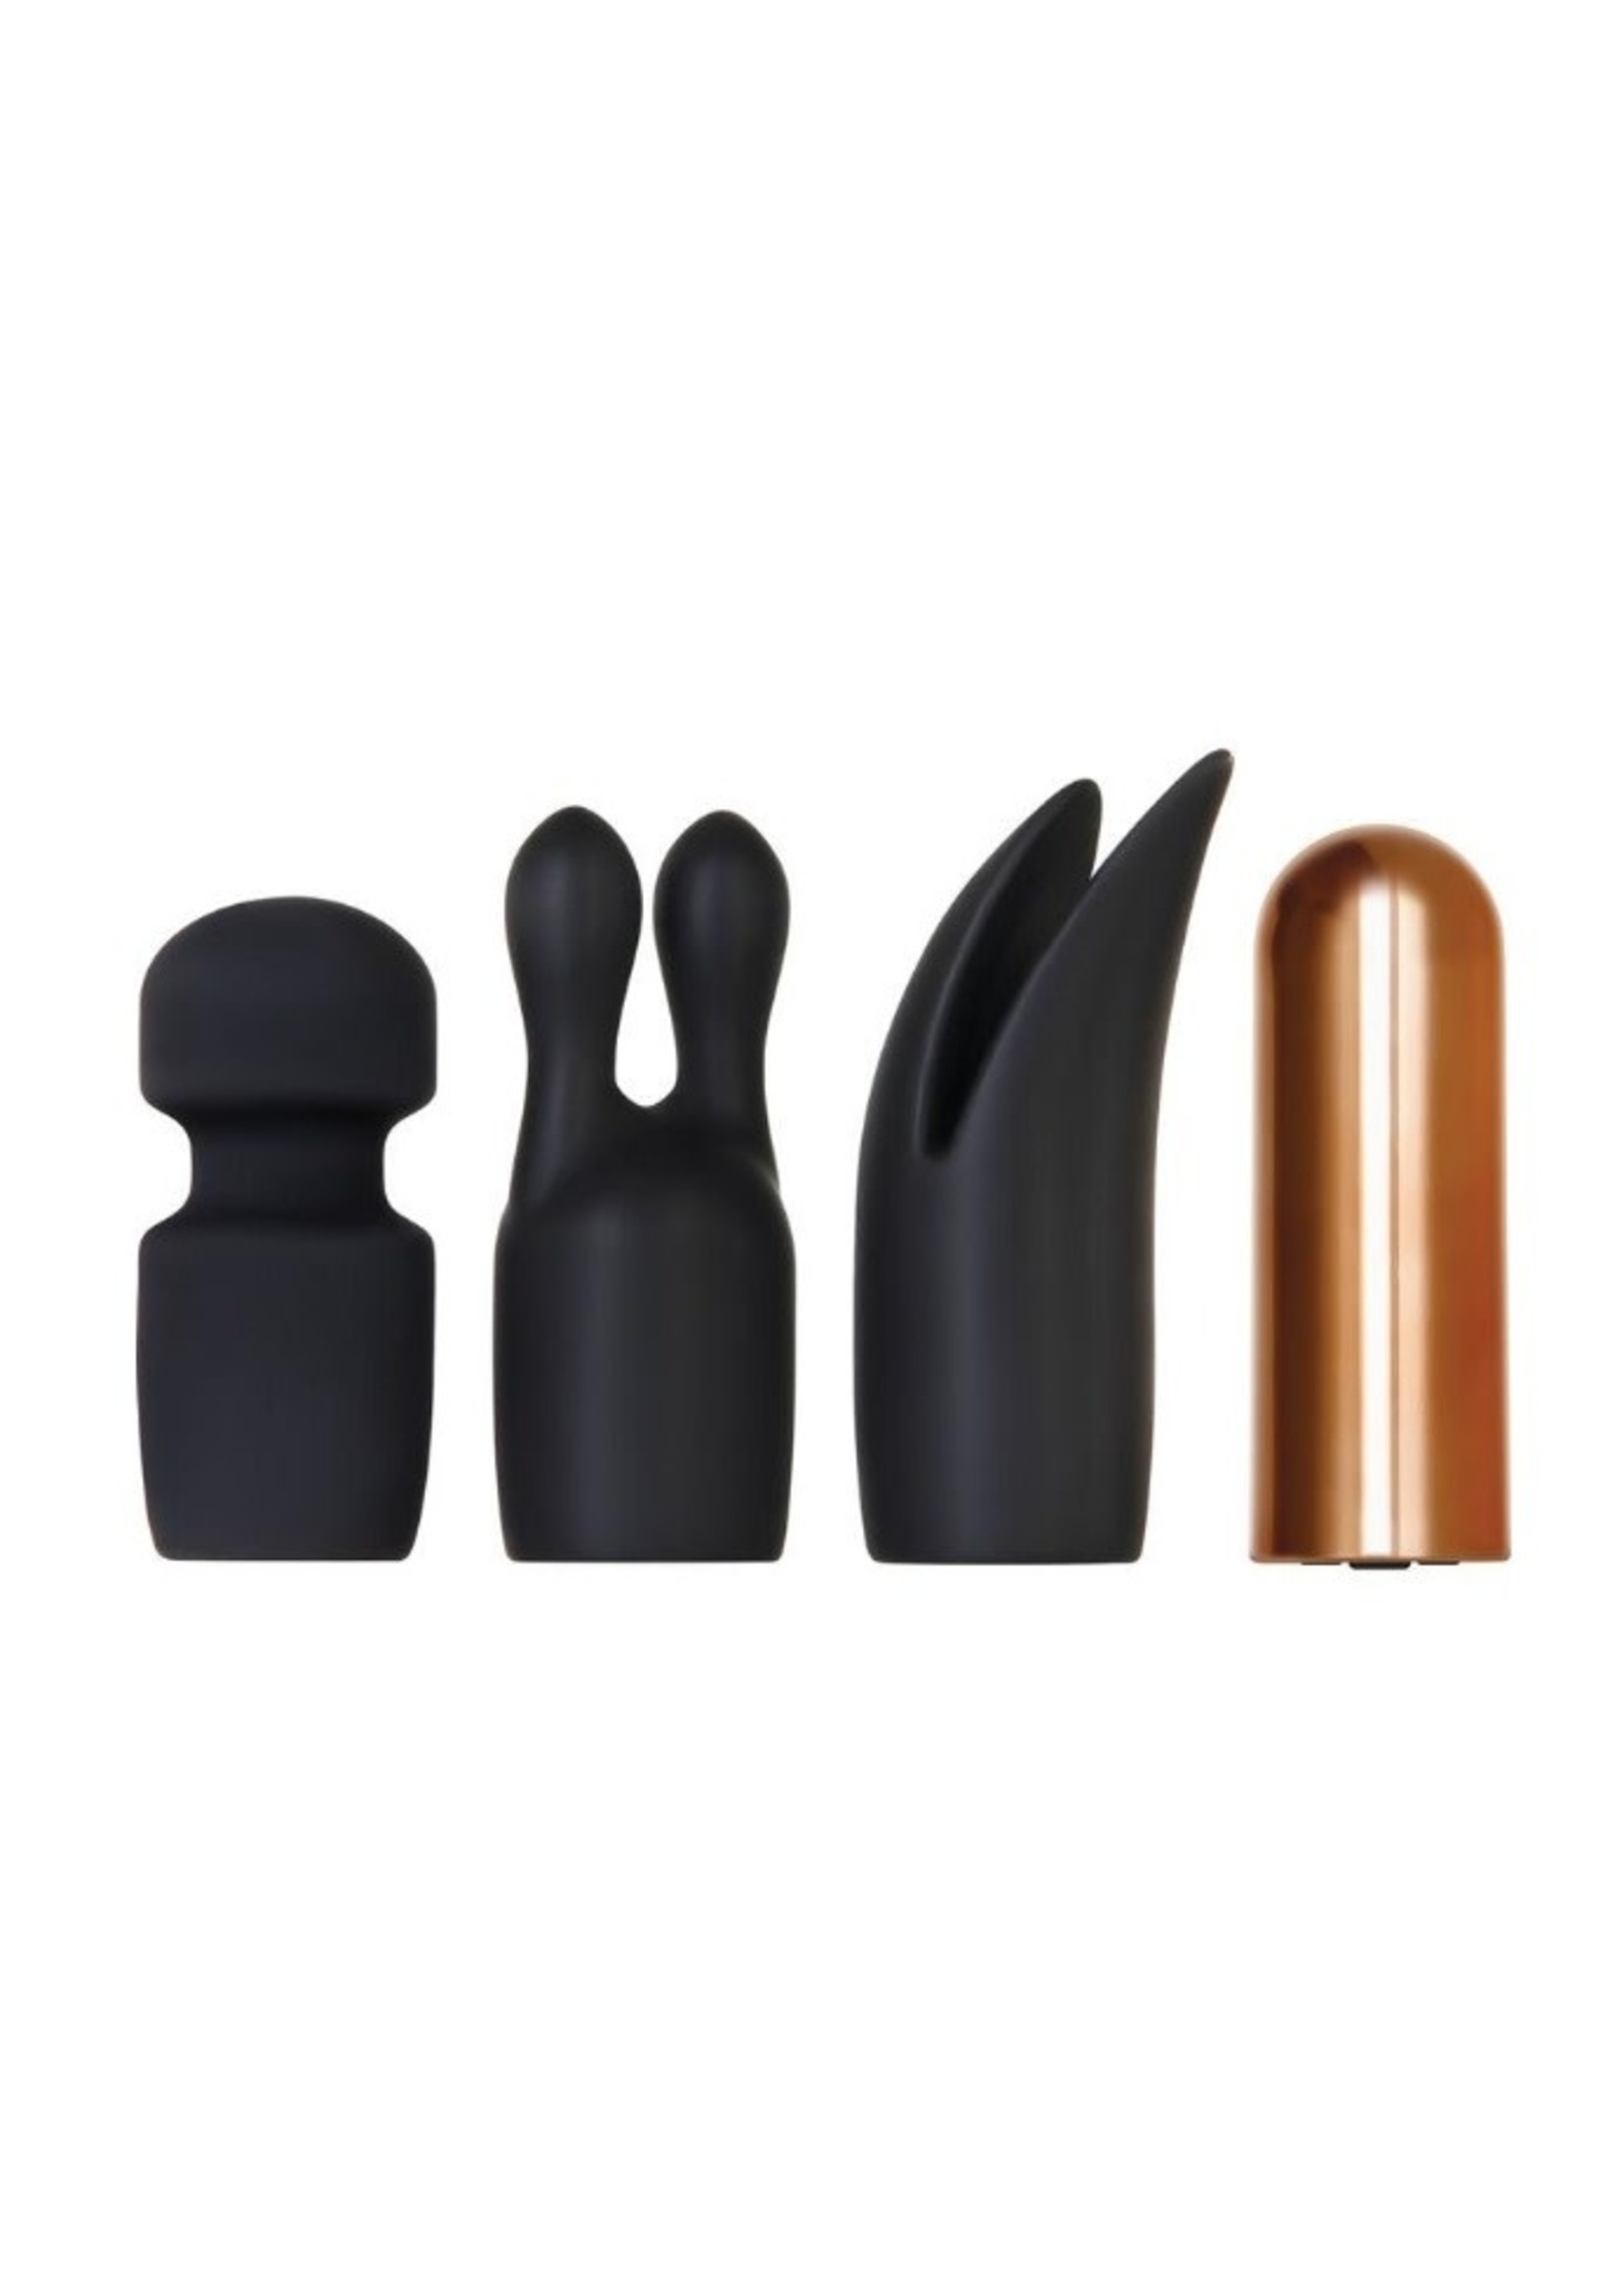 Glam Squad Rechargeable Bullet and 3 Silicone Sleeves Kit - Black and Copper